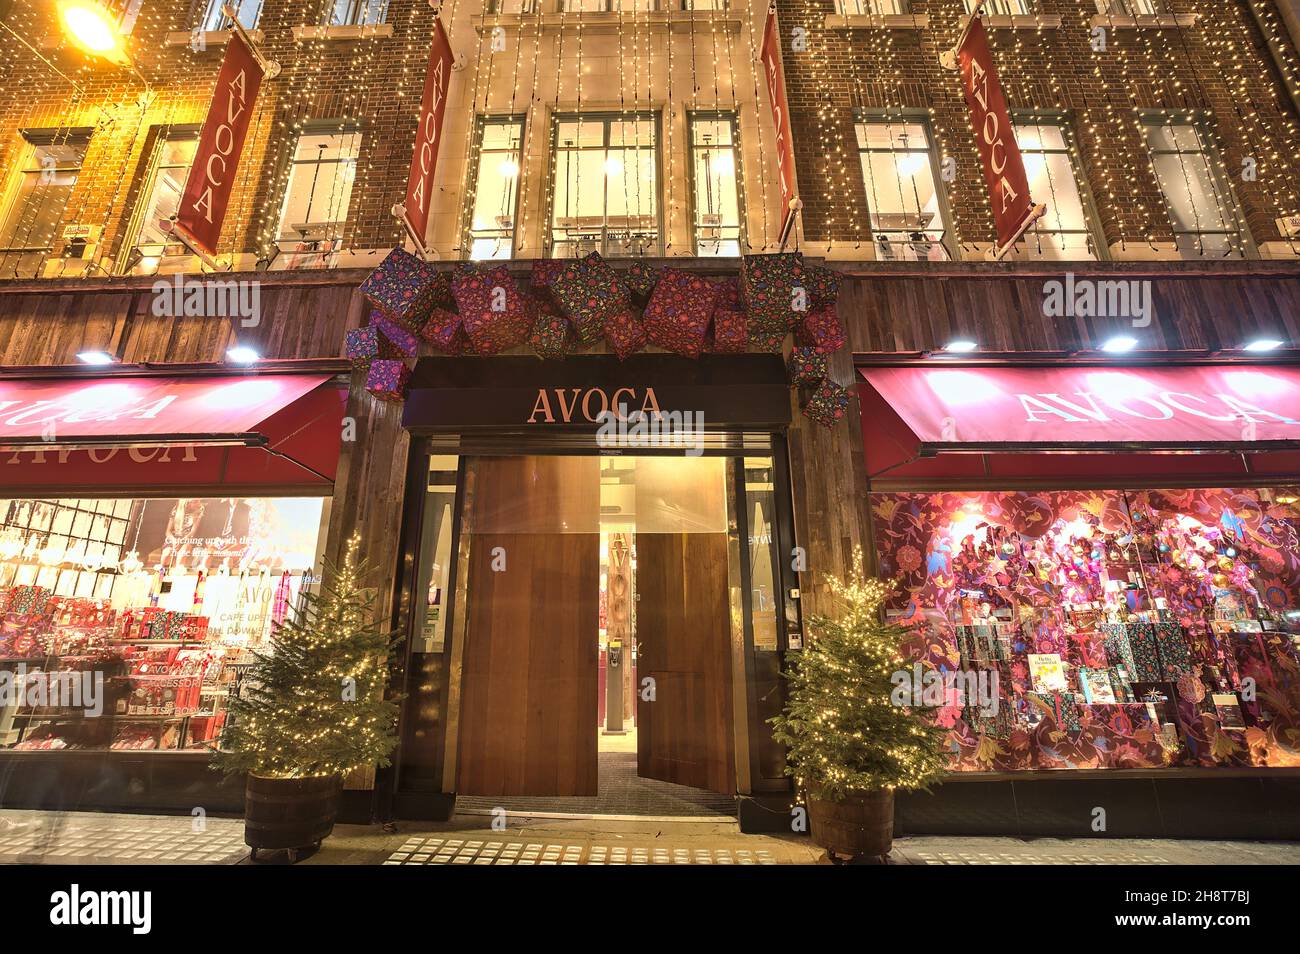 Dublin, Ireland - November 13, 2021: Evening wide angle view of Avoca shop decorated with Christmas lights on Suffolk Street. Christmas store Stock Photo